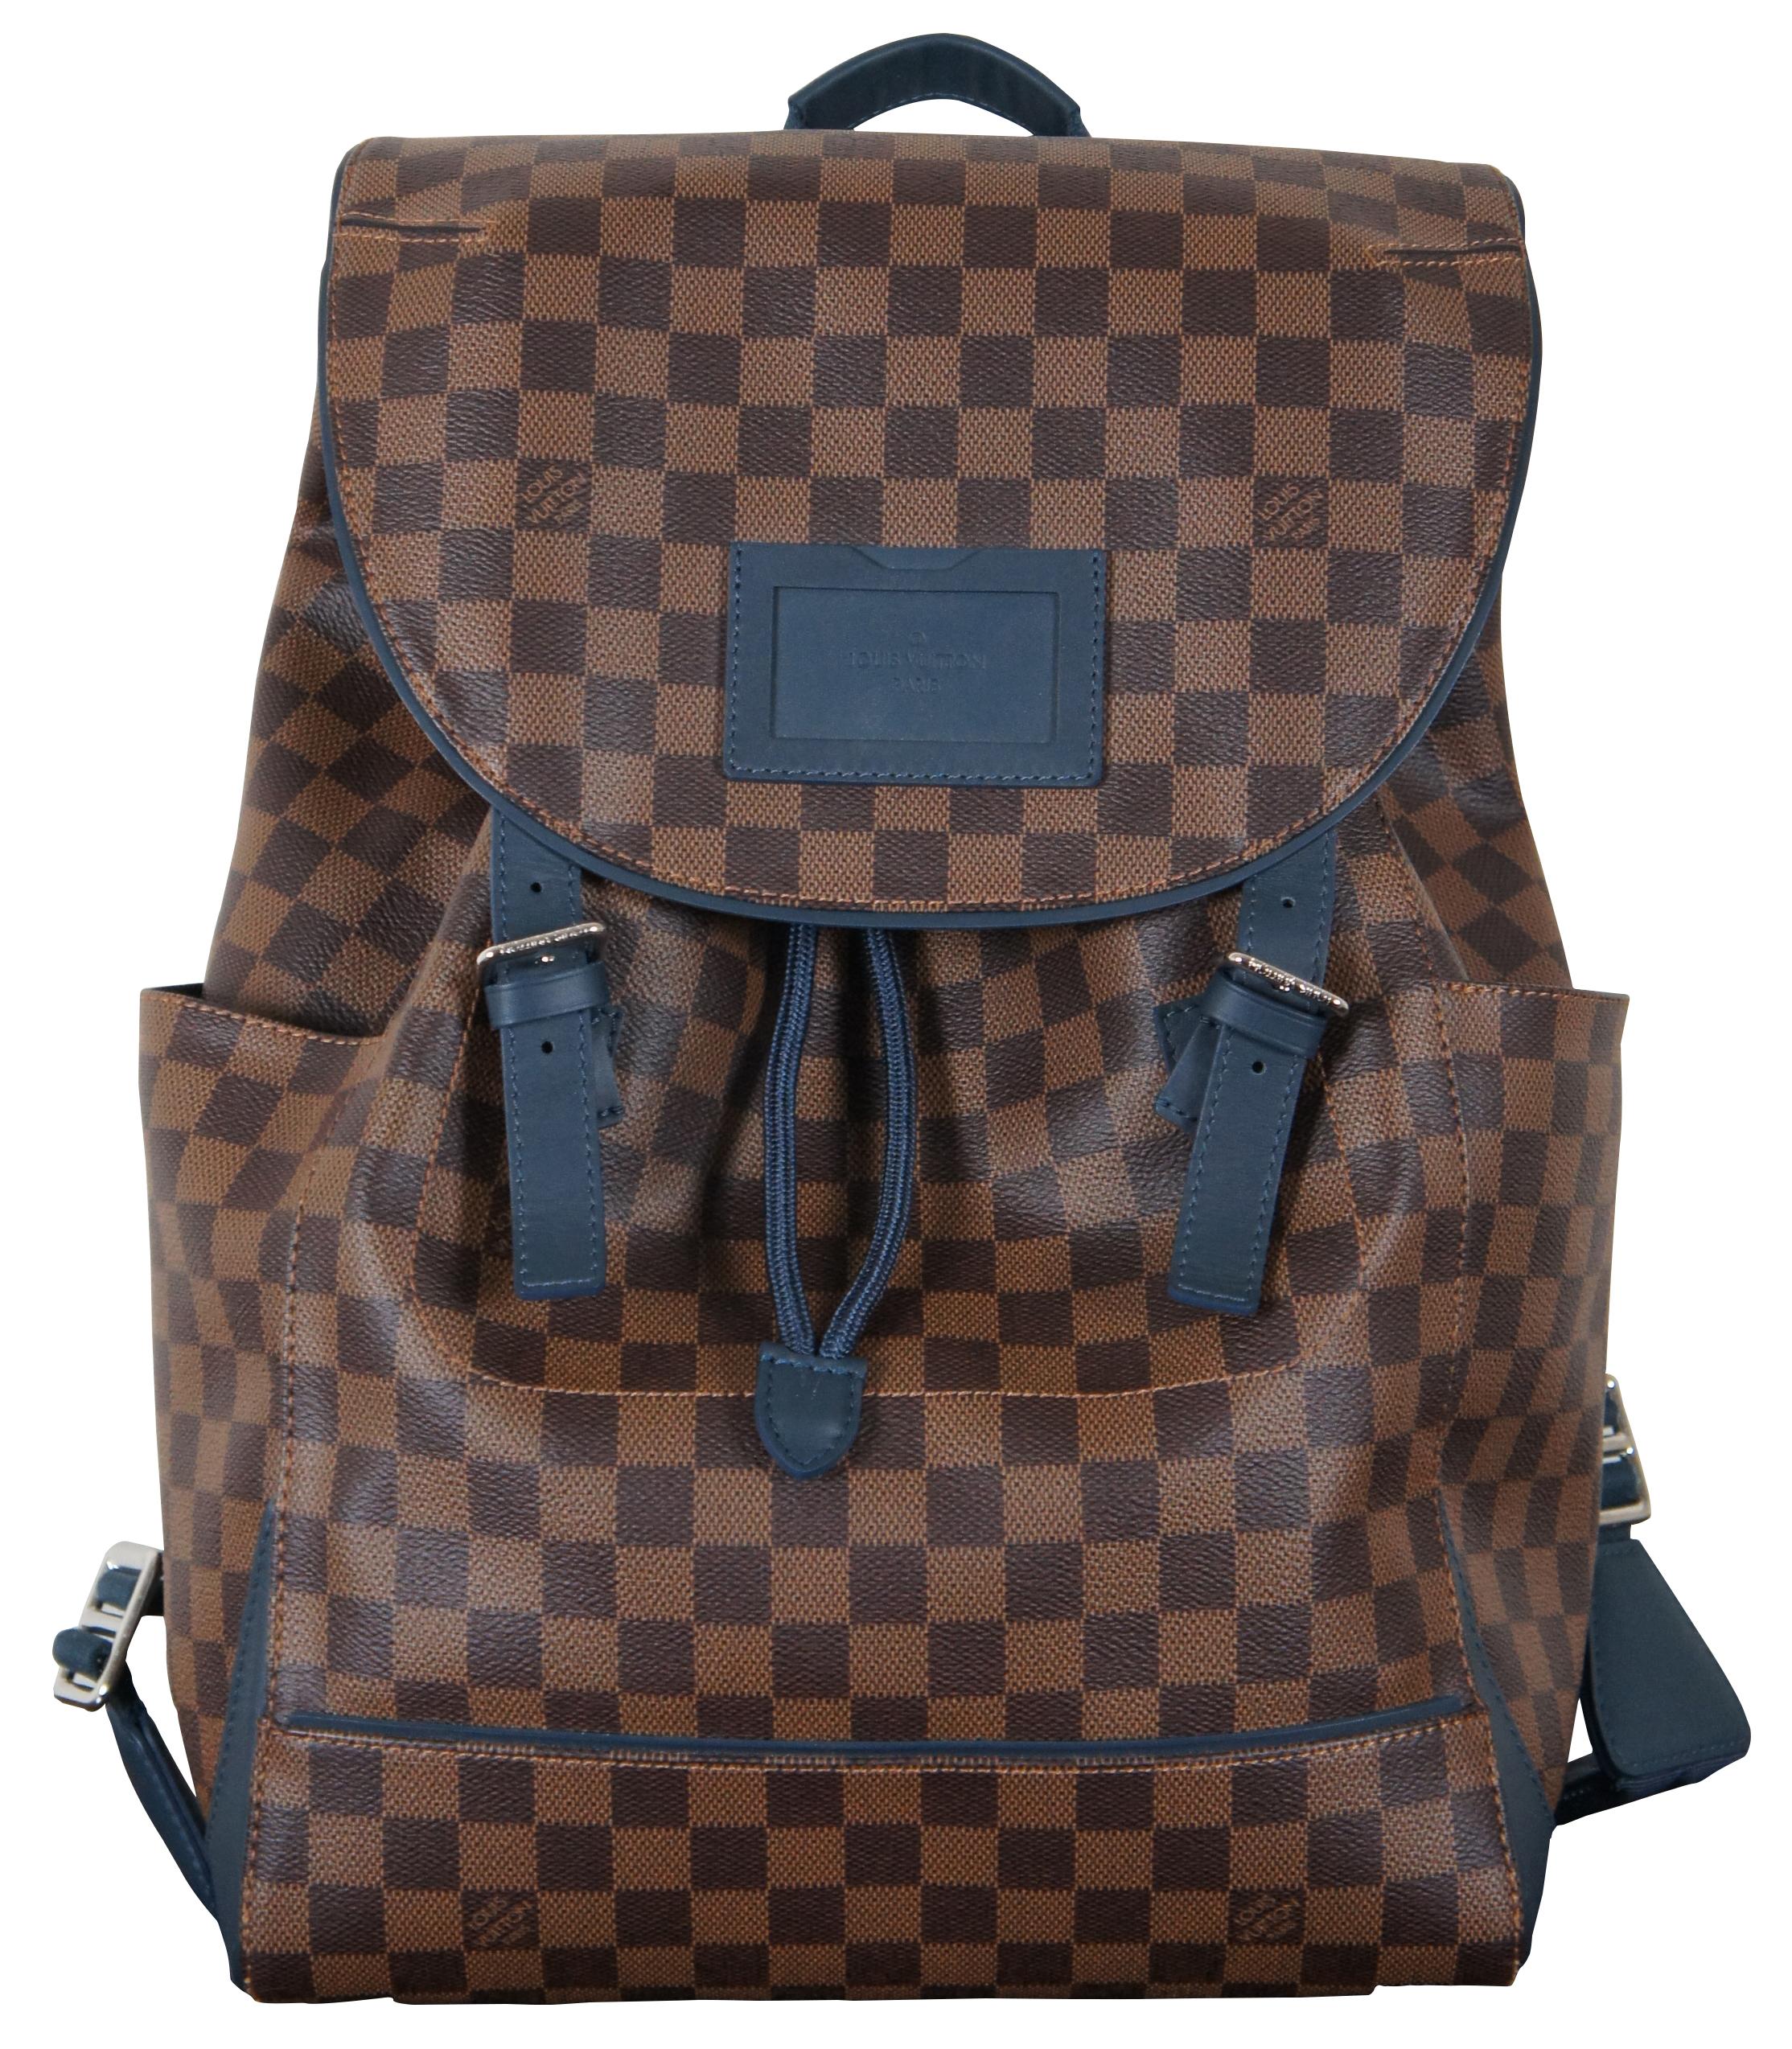 100% Authentic Louis Vuitton Damier Ebene runner backpack in brown check with navy blue leather trim. Includes dust bag and original tags.
 